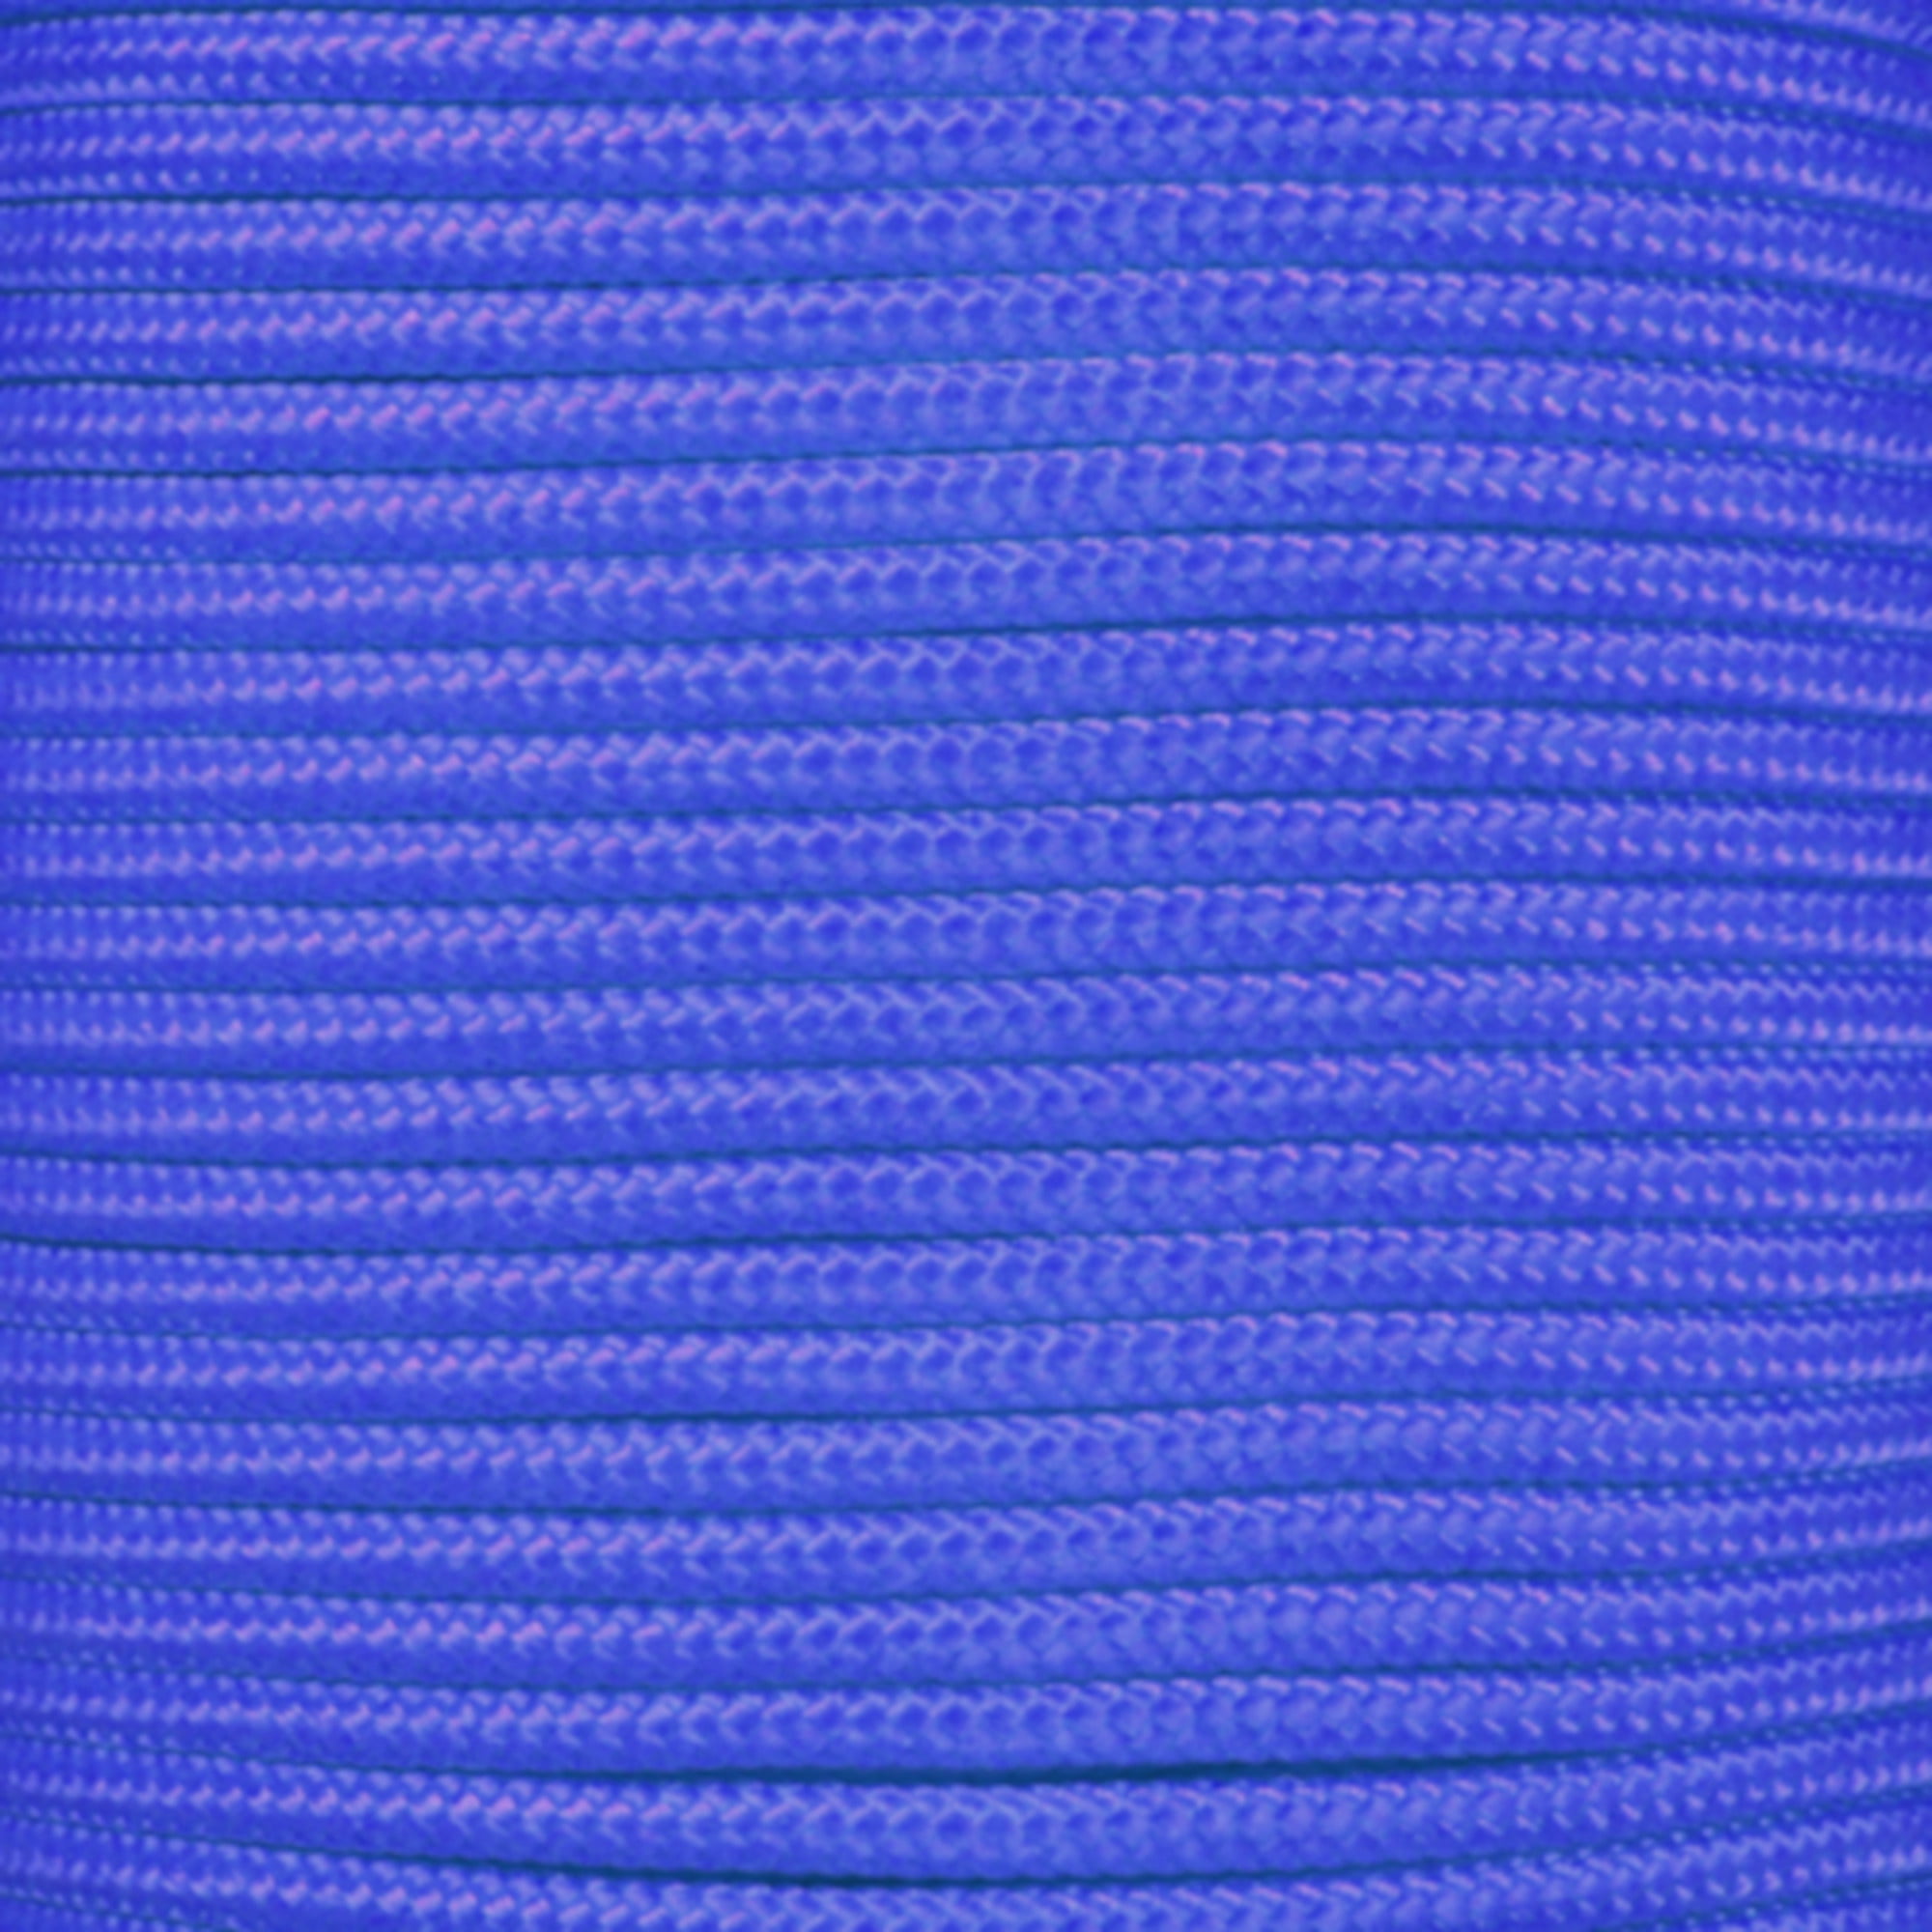 Paracord Planet's Commercial Grade 425lb Tensile Strength Paracord